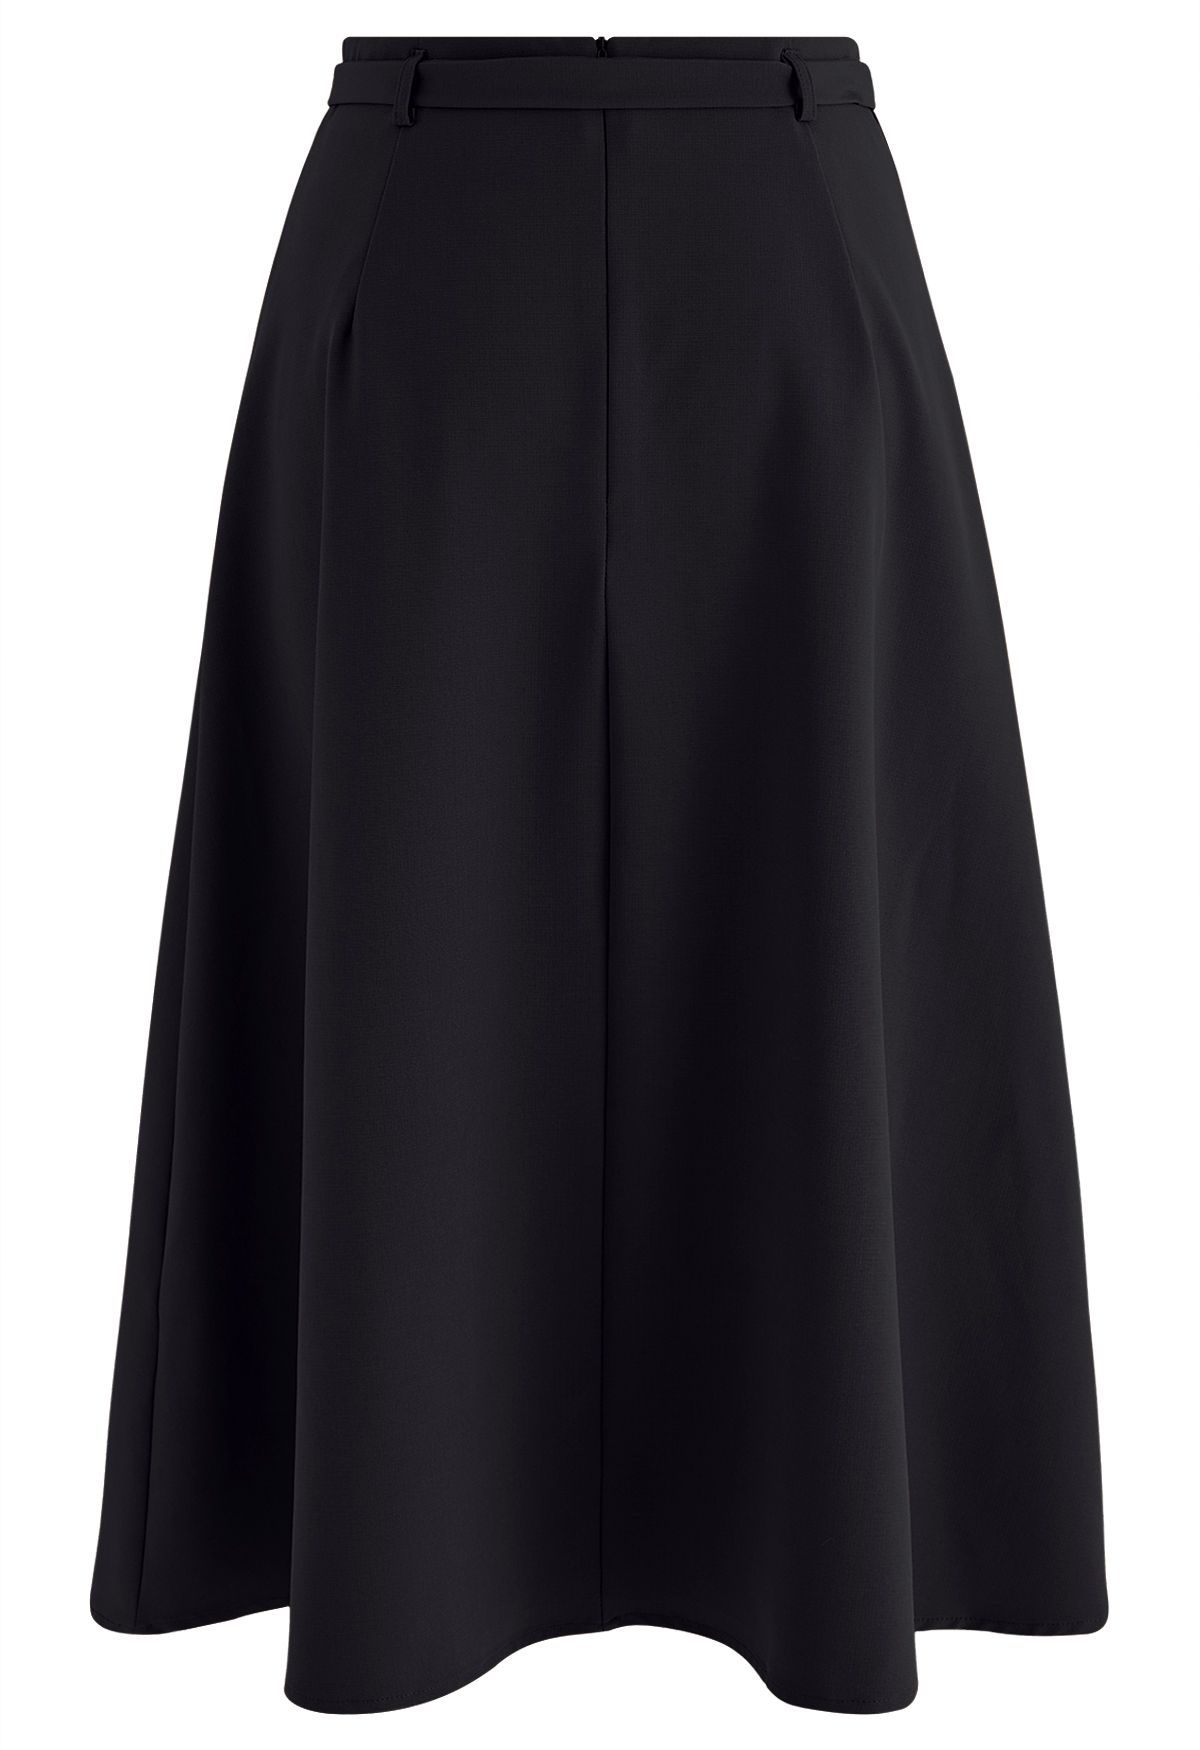 Belted Pleated A-Line Midi Skirt in Black